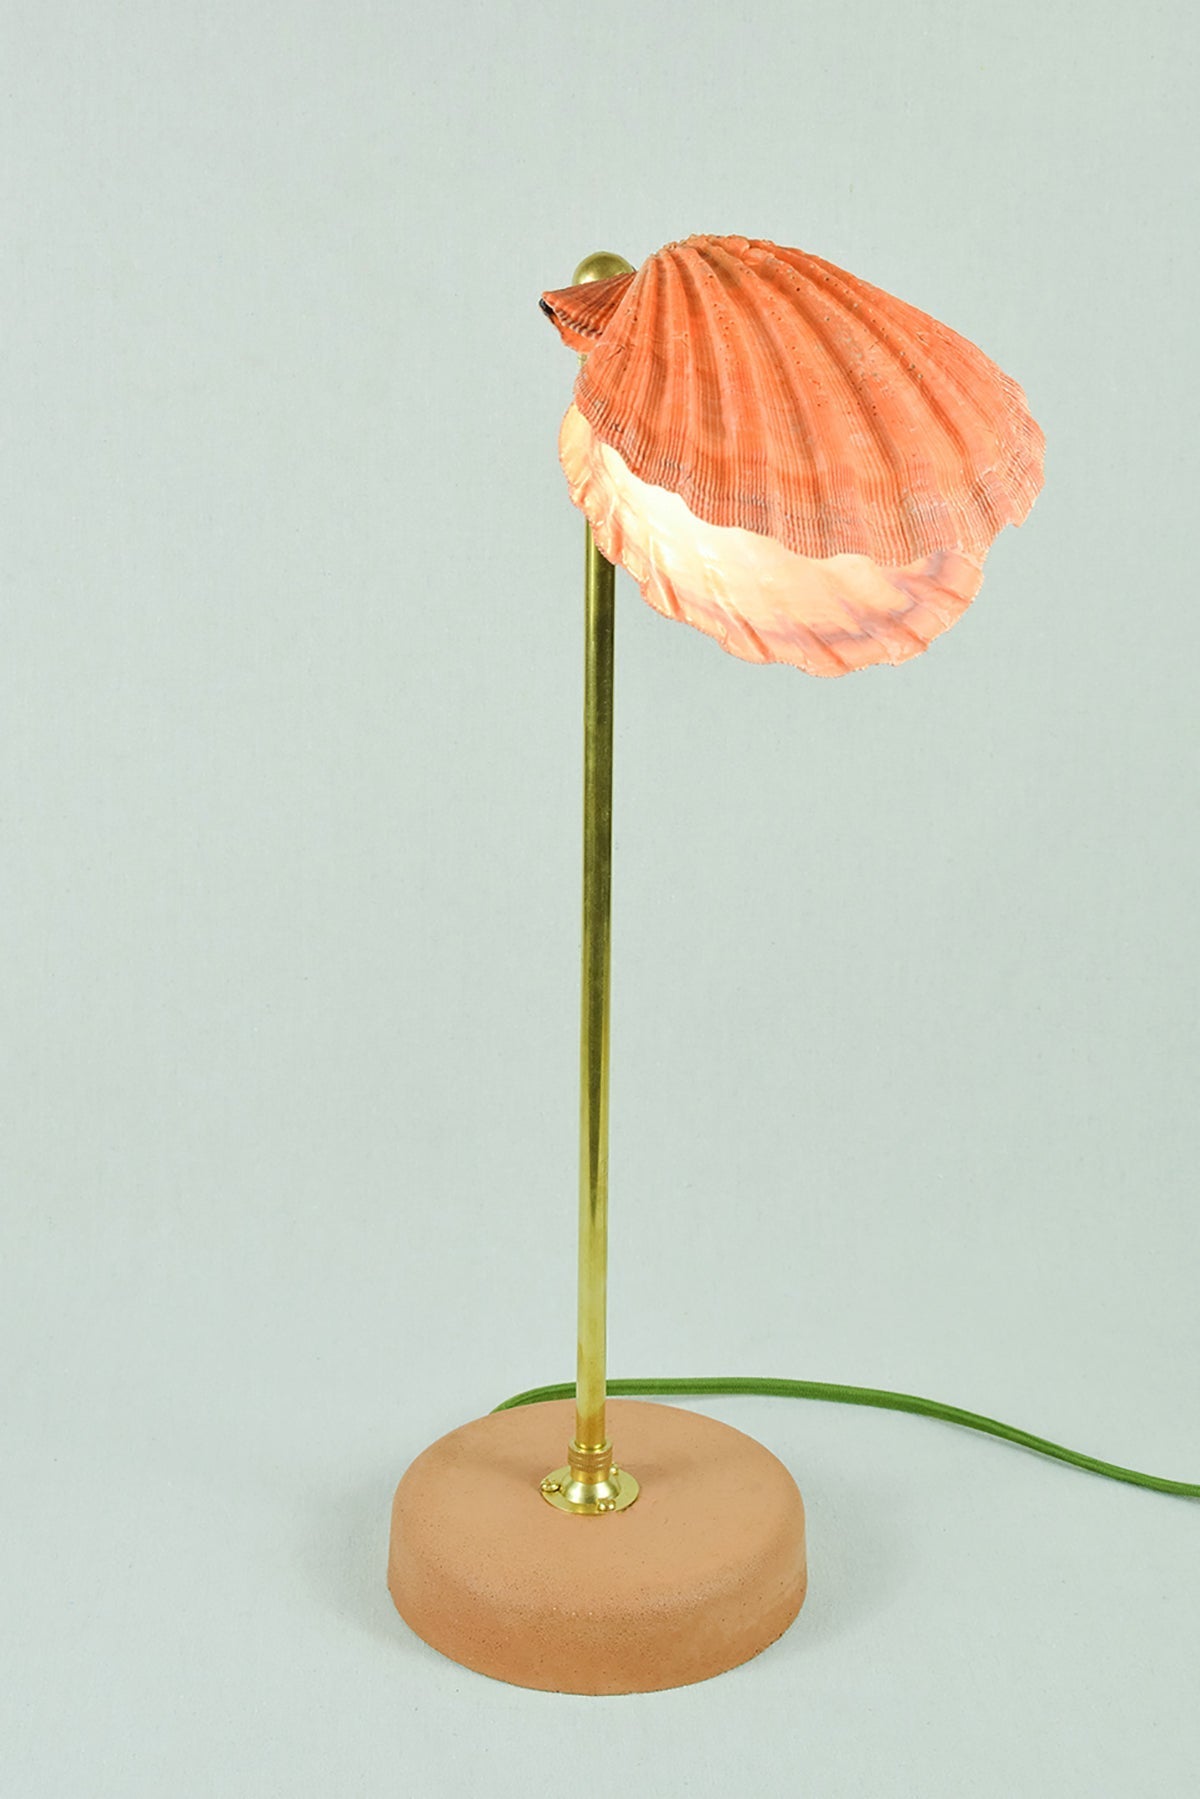 'Lion's Paw Lamp' with Natural Scallop Shell Shade — Model No. 019 - Tennant New York